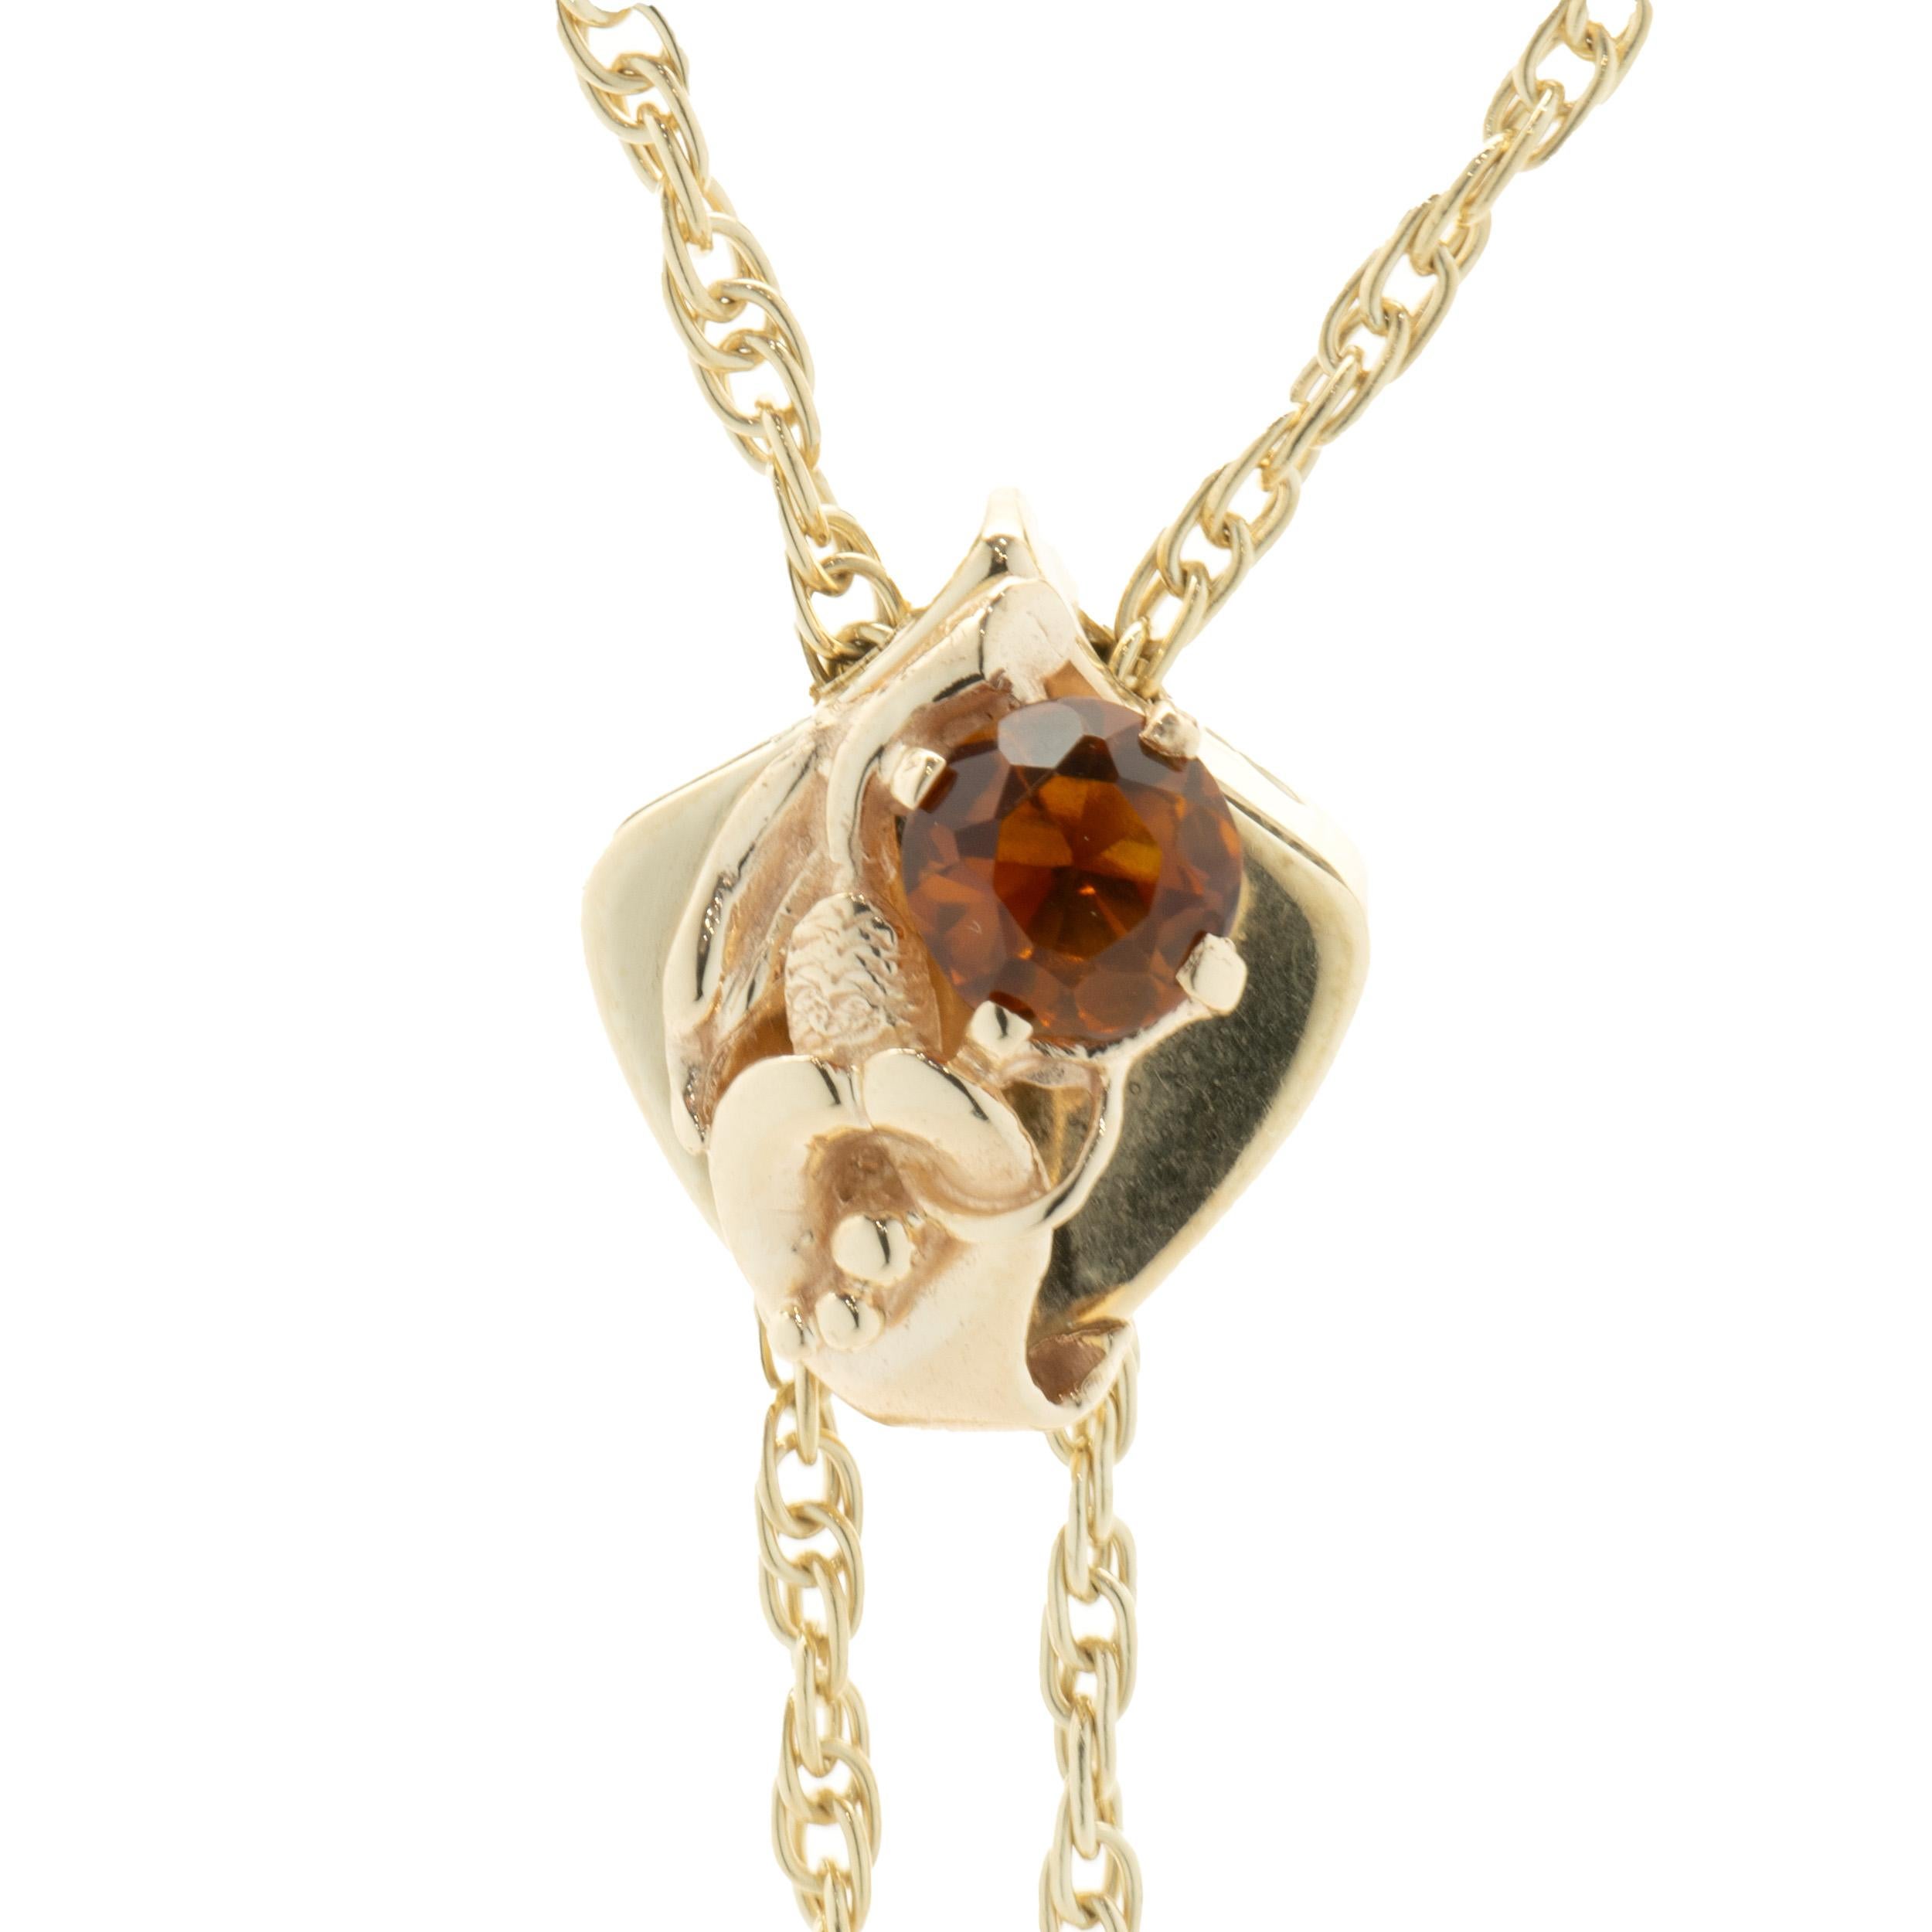 Designer: custom
Material: 14K yellow gold
Citrine: 1 round cut = 1.25ct
Dimensions: necklace measures 17.5-inches in length
Weight: 21.33 grams